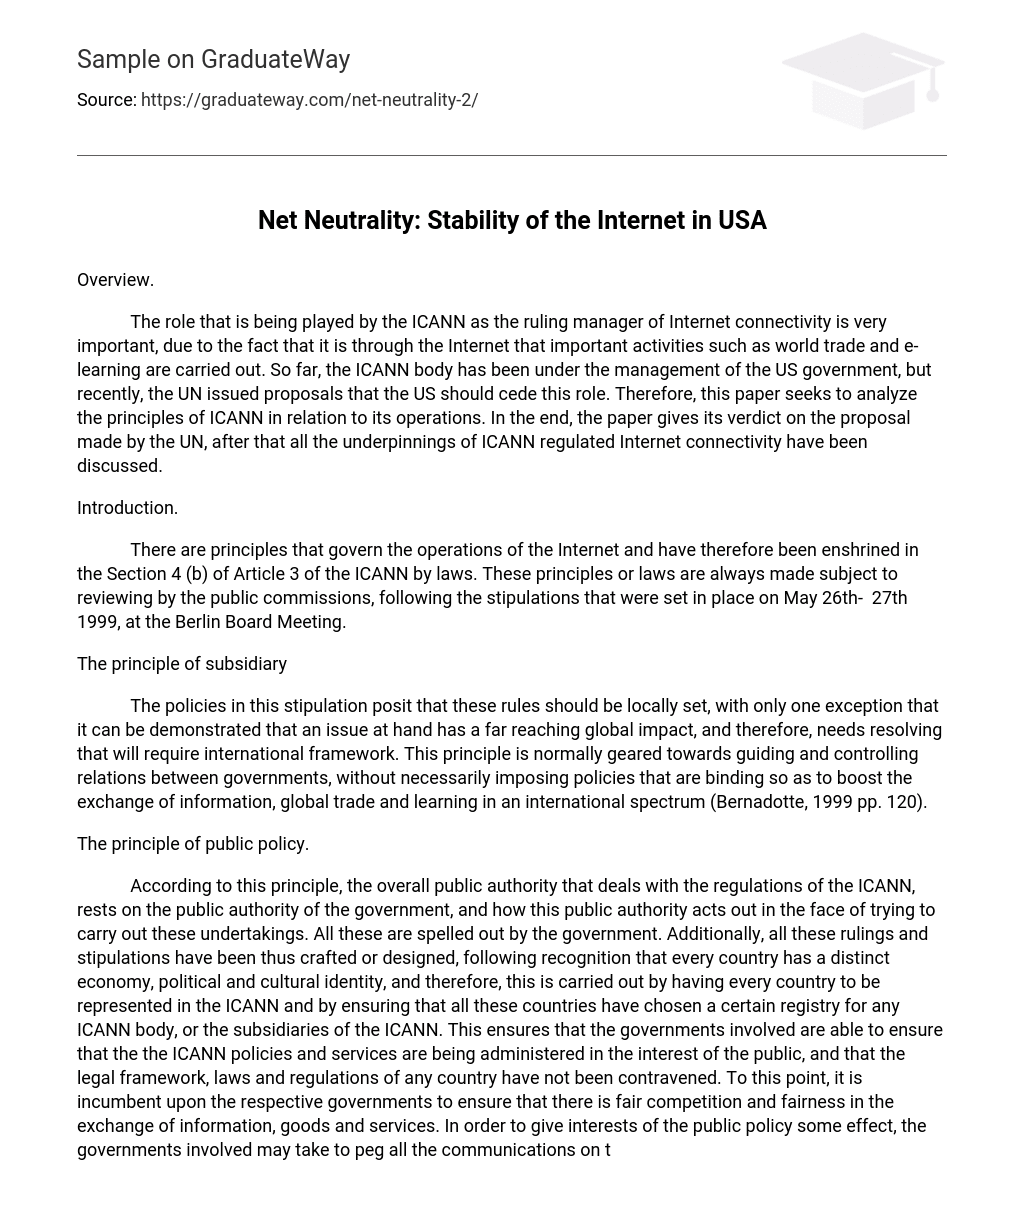 Net Neutrality: Stability of the Internet in USA